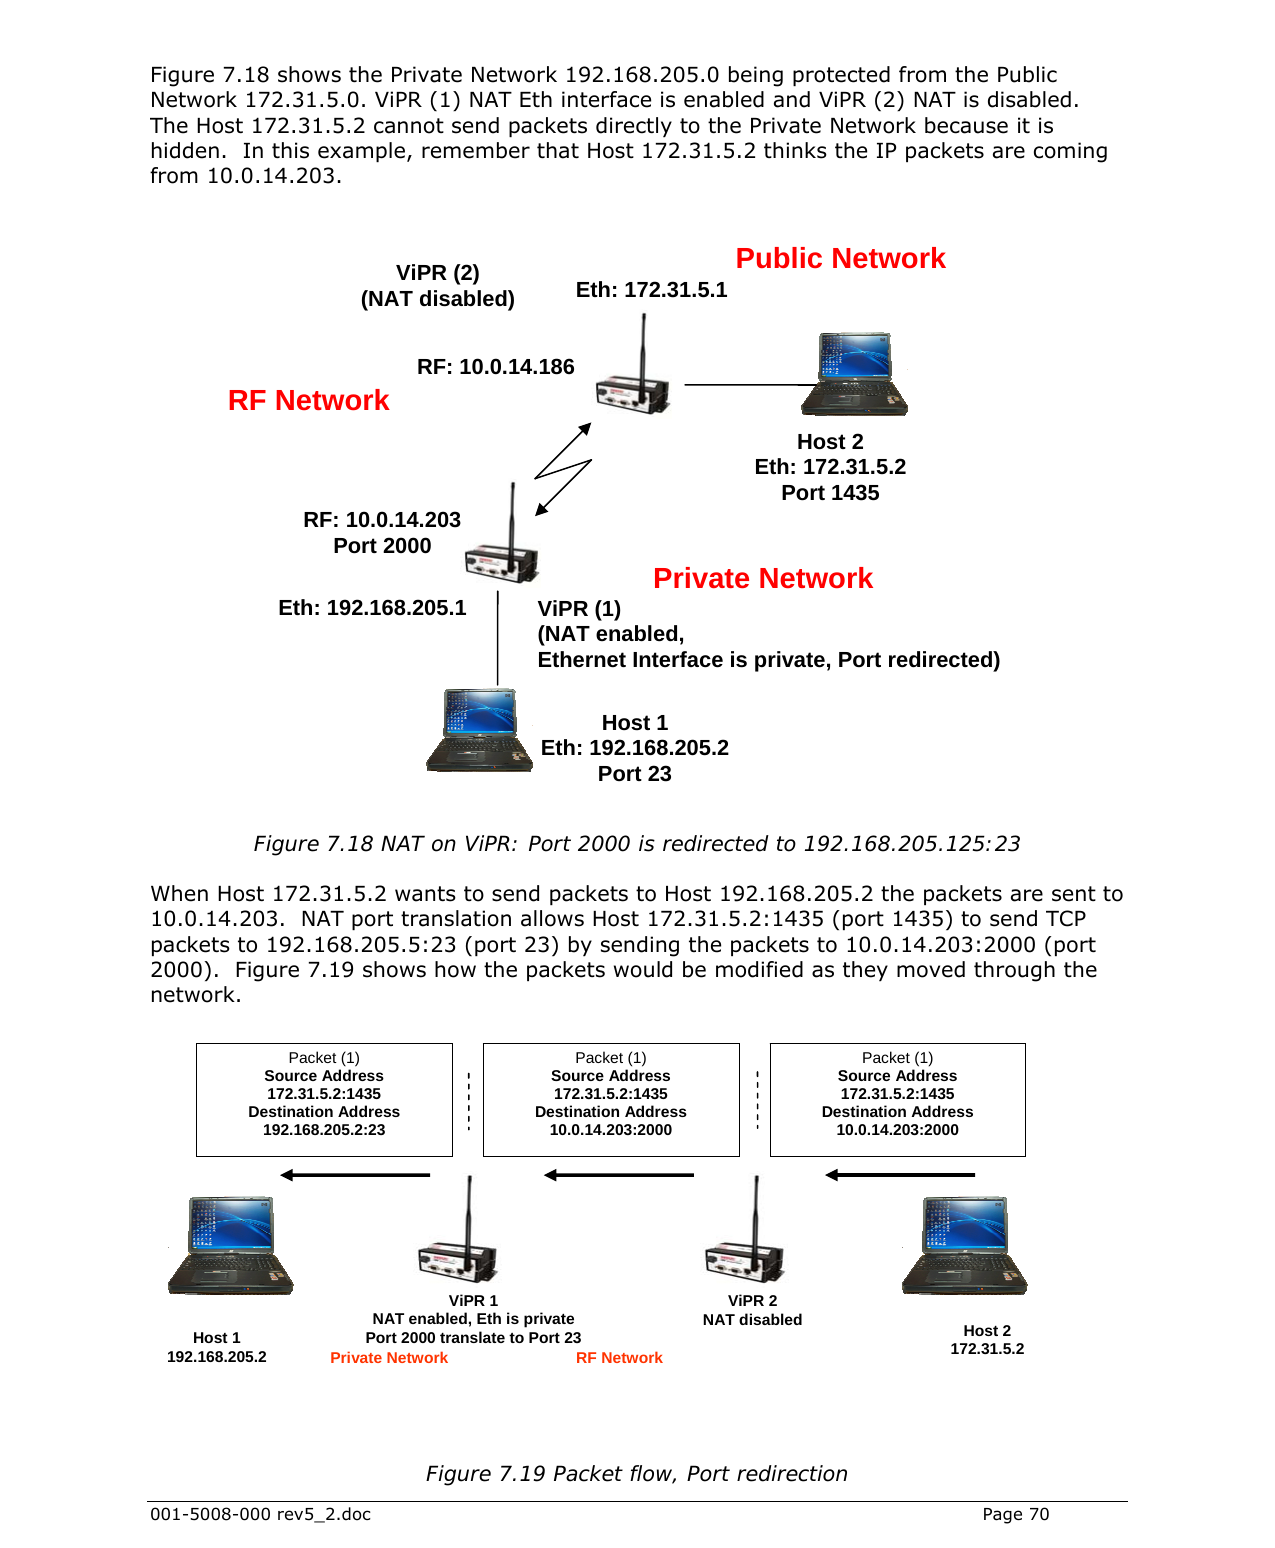  001-5008-000 rev5_2.doc    Page 70 Figure 7.18 shows the Private Network 192.168.205.0 being protected from the Public Network 172.31.5.0. ViPR (1) NAT Eth interface is enabled and ViPR (2) NAT is disabled.  The Host 172.31.5.2 cannot send packets directly to the Private Network because it is hidden.  In this example, remember that Host 172.31.5.2 thinks the IP packets are coming from 10.0.14.203.               Figure 7.18 NAT on ViPR: Port 2000 is redirected to 192.168.205.125:23  When Host 172.31.5.2 wants to send packets to Host 192.168.205.2 the packets are sent to 10.0.14.203.  NAT port translation allows Host 172.31.5.2:1435 (port 1435) to send TCP packets to 192.168.205.5:23 (port 23) by sending the packets to 10.0.14.203:2000 (port 2000).  Figure 7.19 shows how the packets would be modified as they moved through the network.            Figure 7.19 Packet flow, Port redirection  Packet (1) Source Address  172.31.5.2:1435 Destination Address 192.168.205.2:23 Packet (1) Source Address 172.31.5.2:1435 Destination Address 10.0.14.203:2000 Packet (1) Source Address 172.31.5.2:1435 Destination Address 10.0.14.203:2000 Host 1  192.168.205.2 Host 2  172.31.5.2 ViPR 1 NAT enabled, Eth is private Port 2000 translate to Port 23 ViPR 2 NAT disabled  Private Network   RF Network Eth: 172.31.5.1 RF: 10.0.14.203 Port 2000 RF: 10.0.14.186Eth: 192.168.205.1 Host 2 Eth: 172.31.5.2 Port 1435 ViPR (2) (NAT disabled) Private NetworkHost 1 Eth: 192.168.205.2 Port 23 Public Network RF Network ViPR (1) (NAT enabled,  Ethernet Interface is private, Port redirected) 